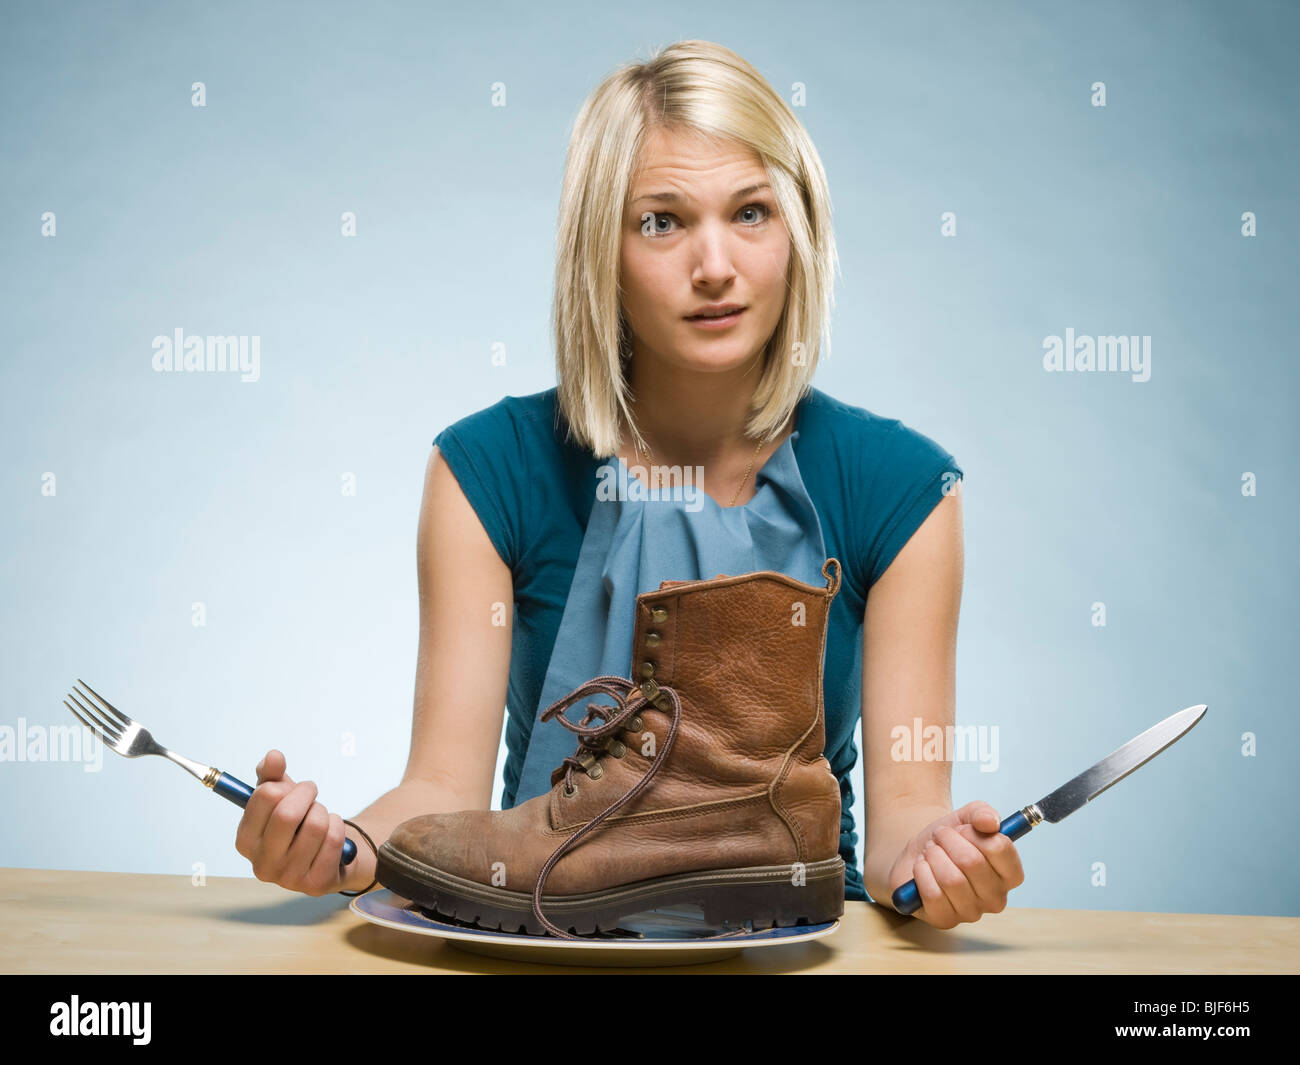 Woman eating a boot Banque D'Images